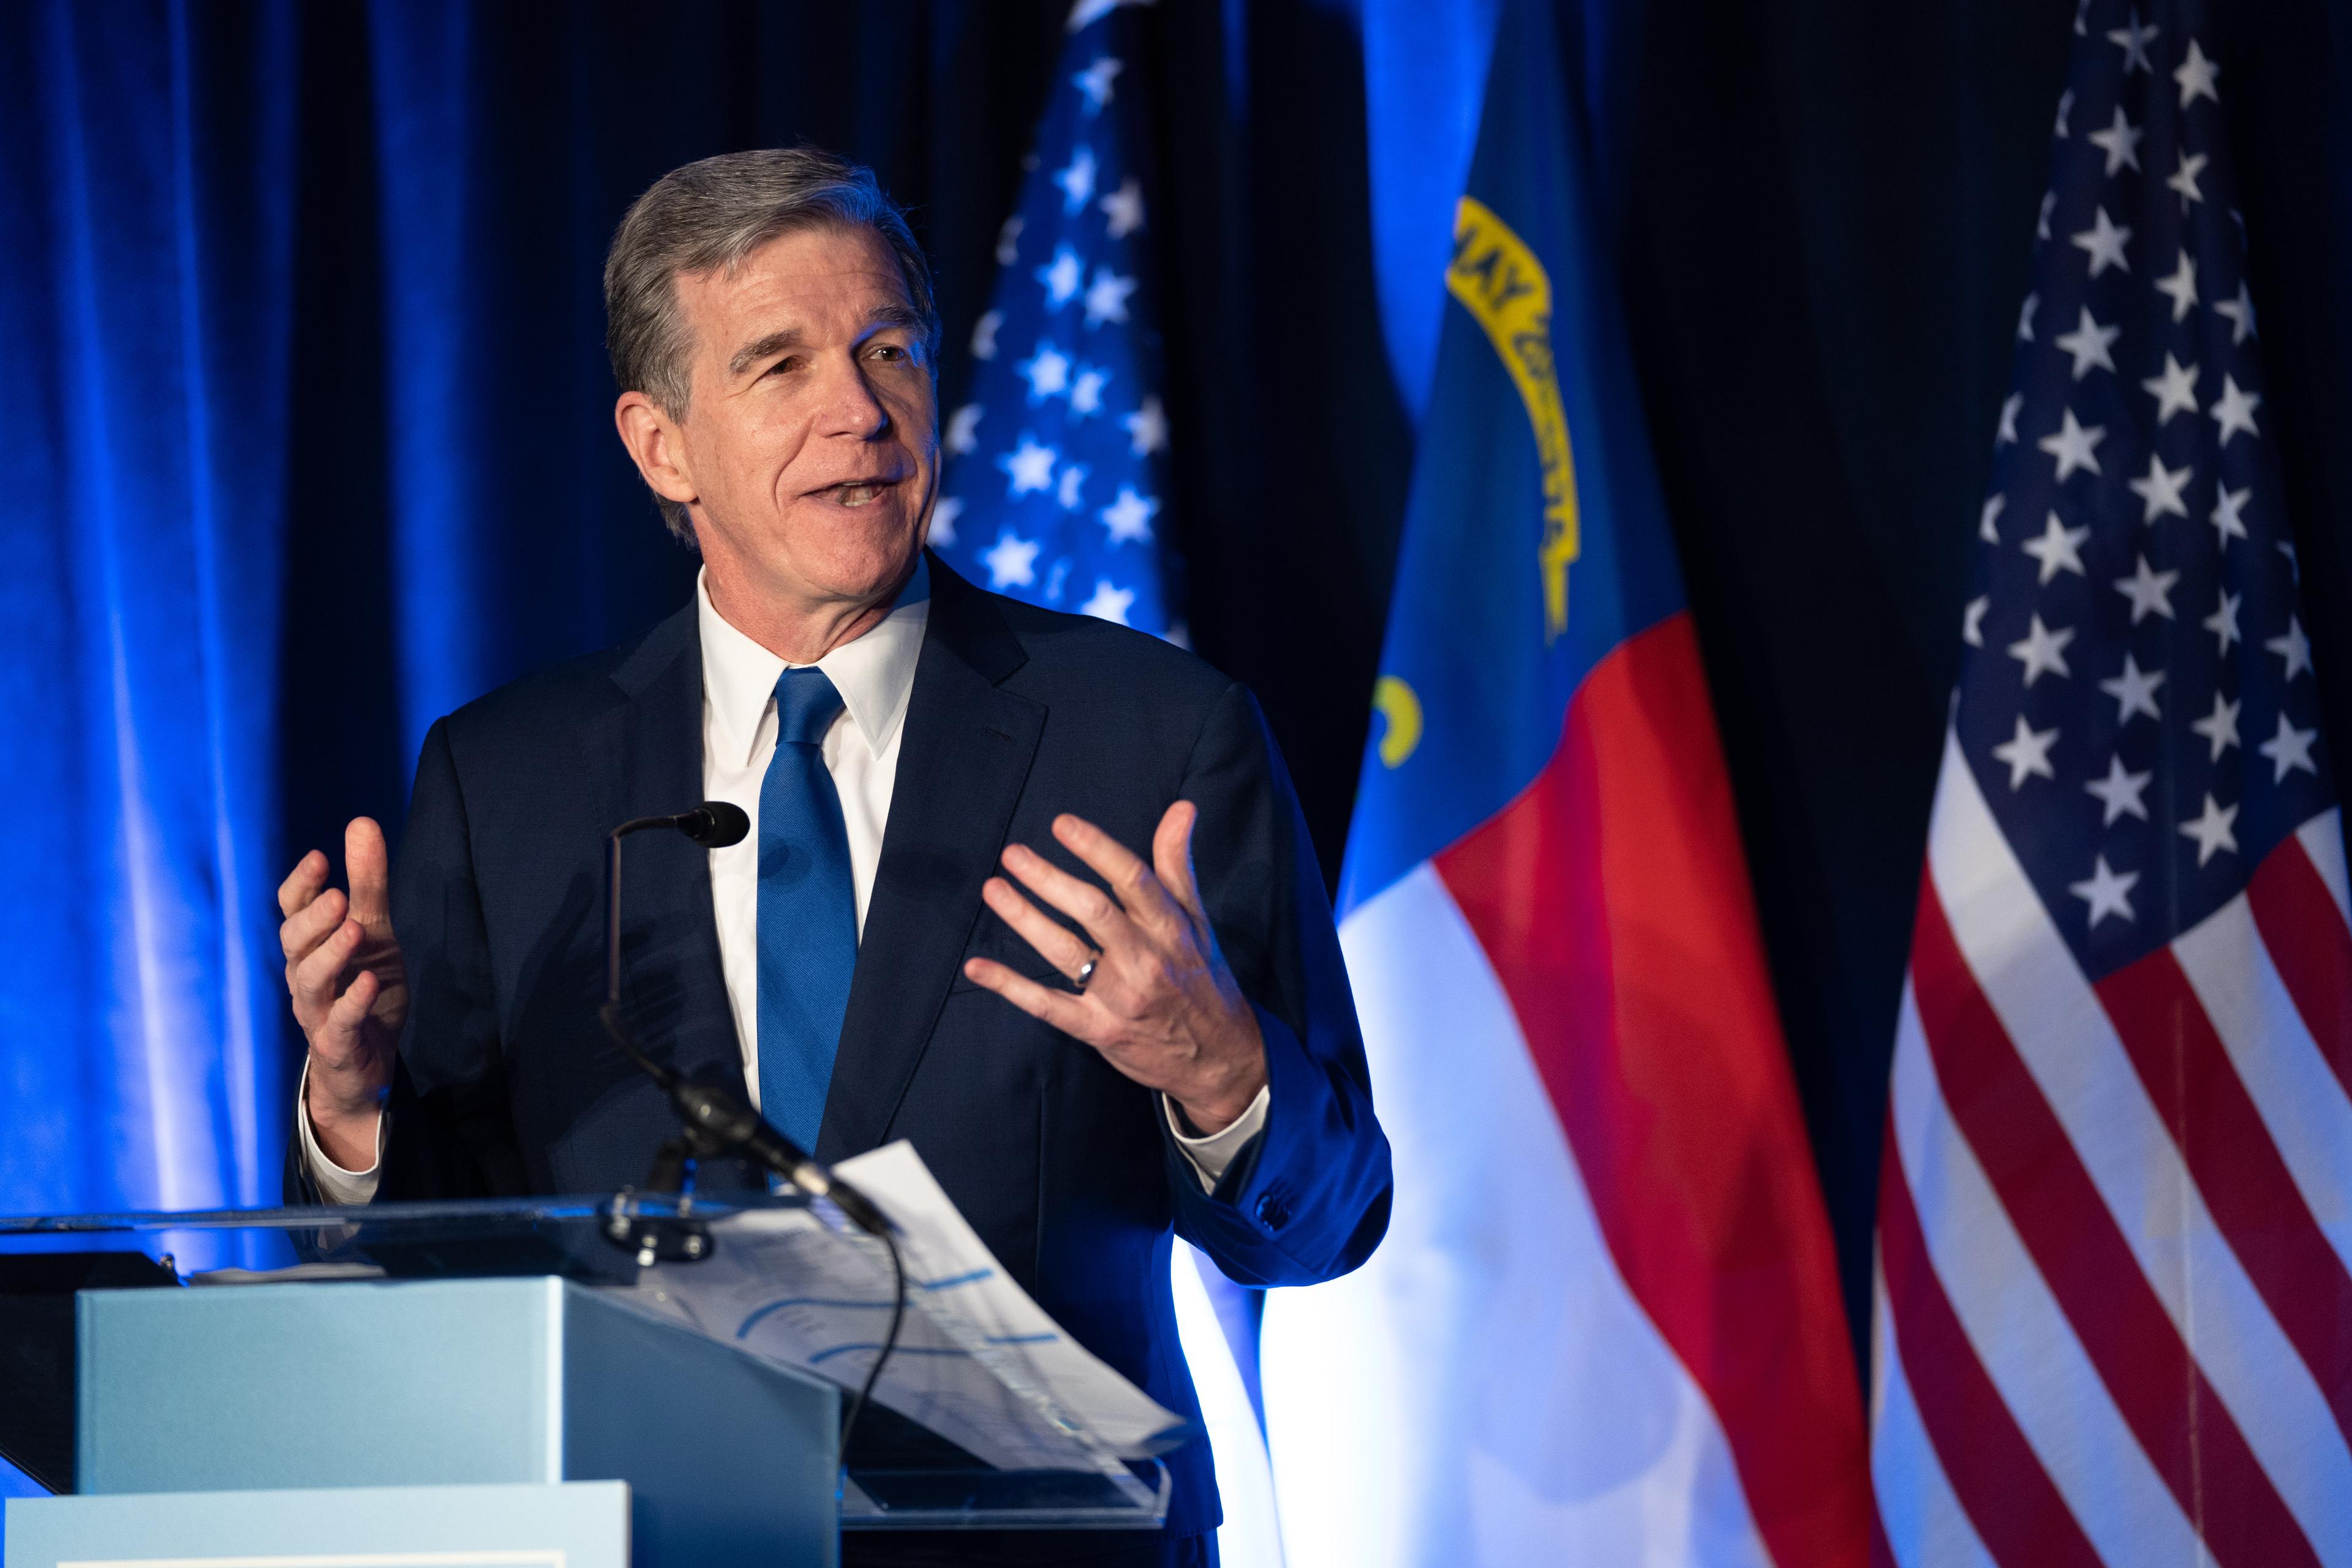 N.C. governor sets Medicaid expansion date, pressuring Republicans to act